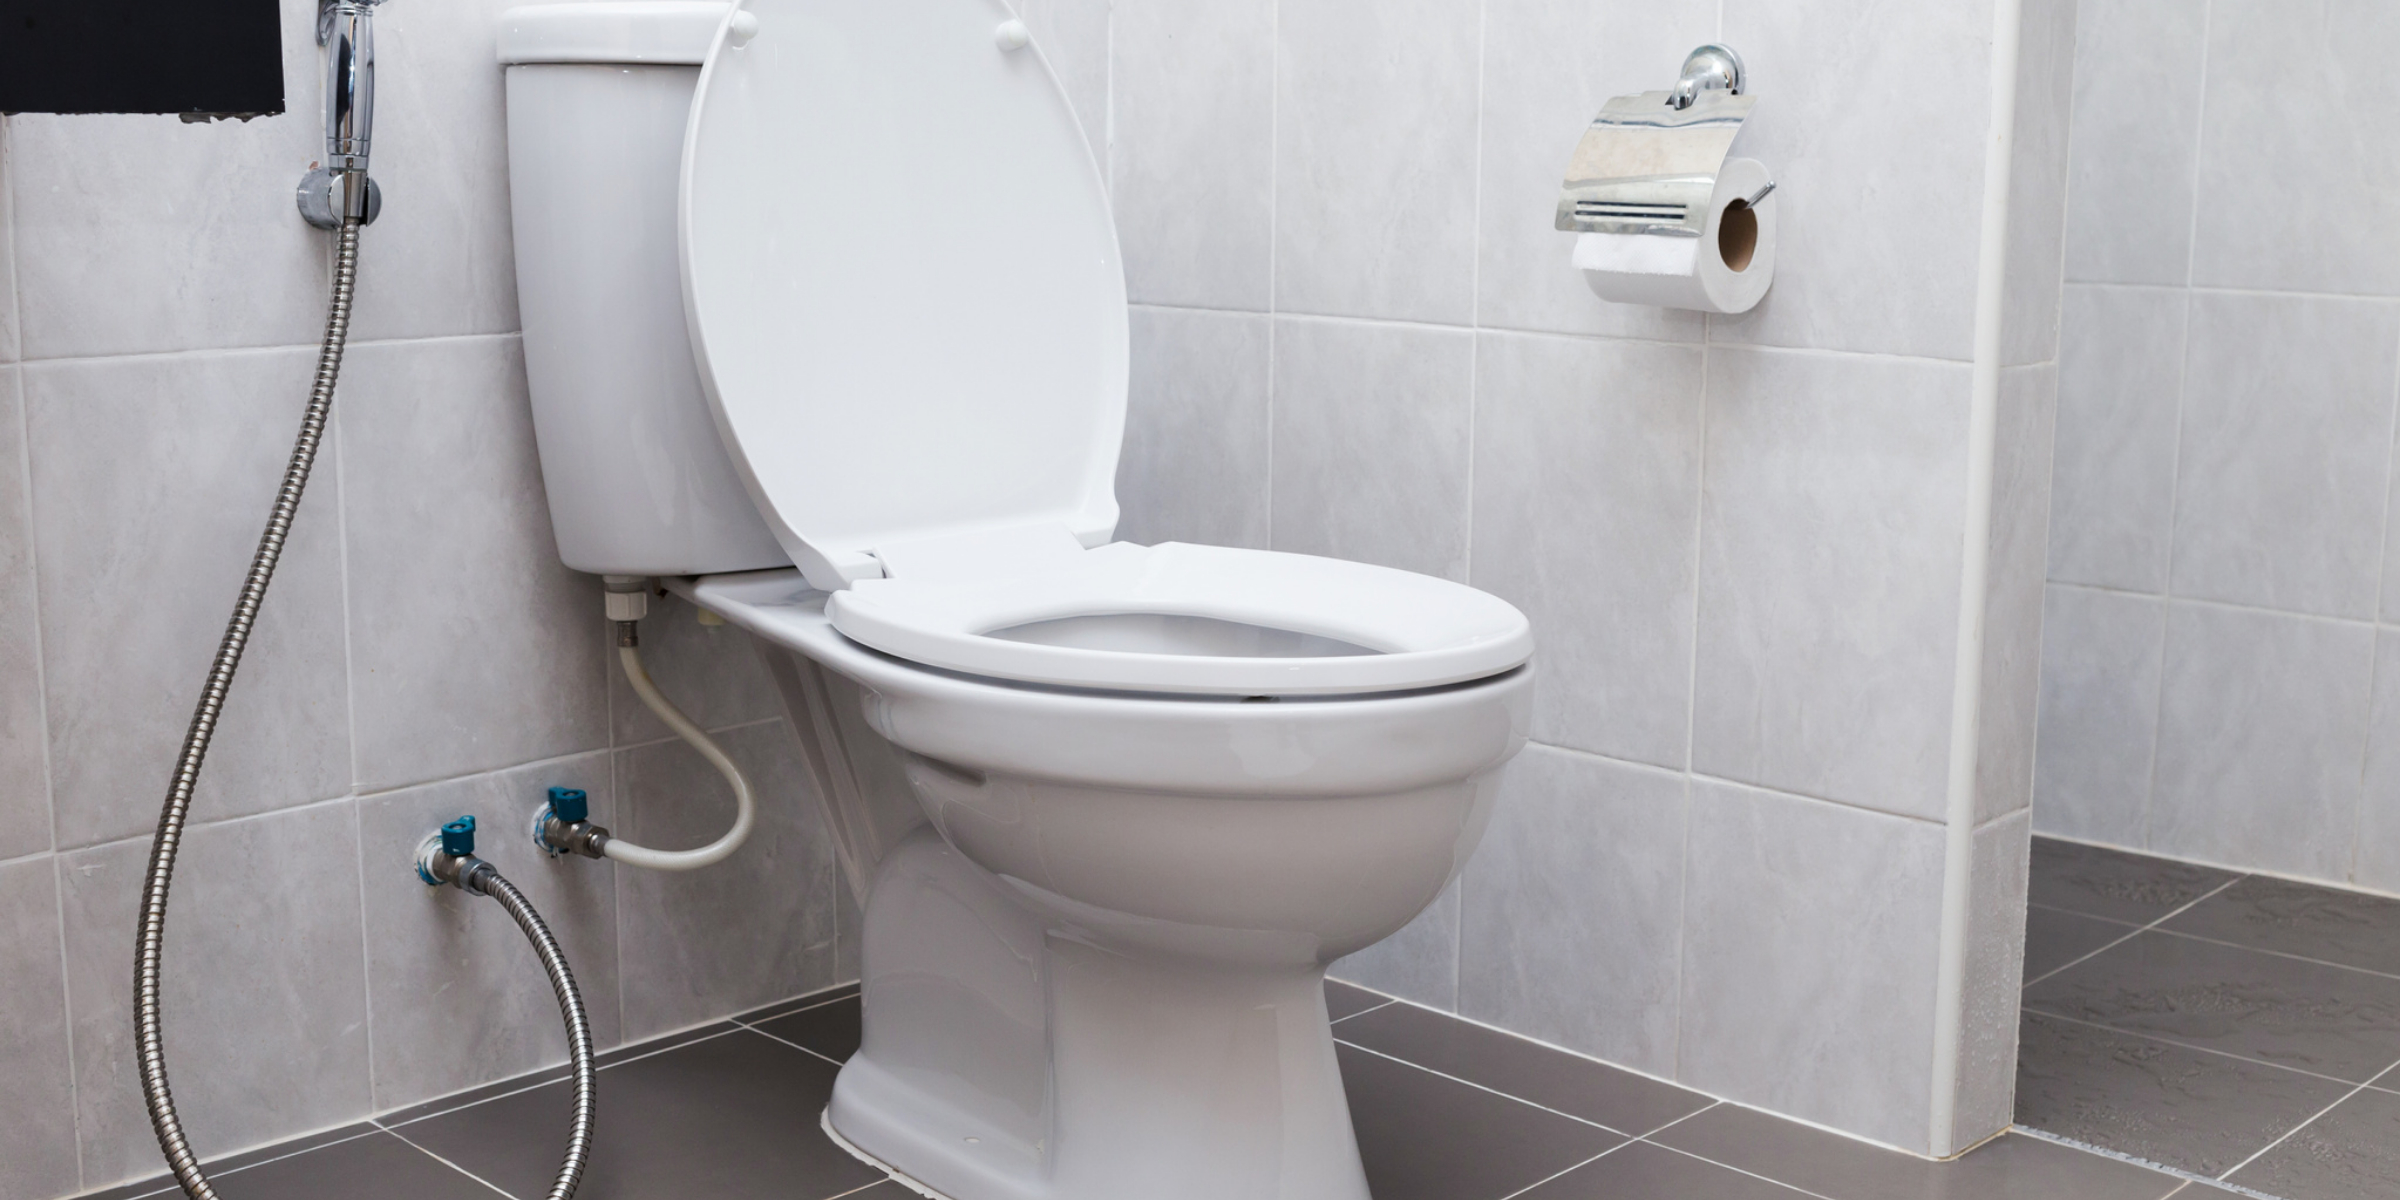 DIY Guide to Fixing a Loose Toilet Seat in Minutes